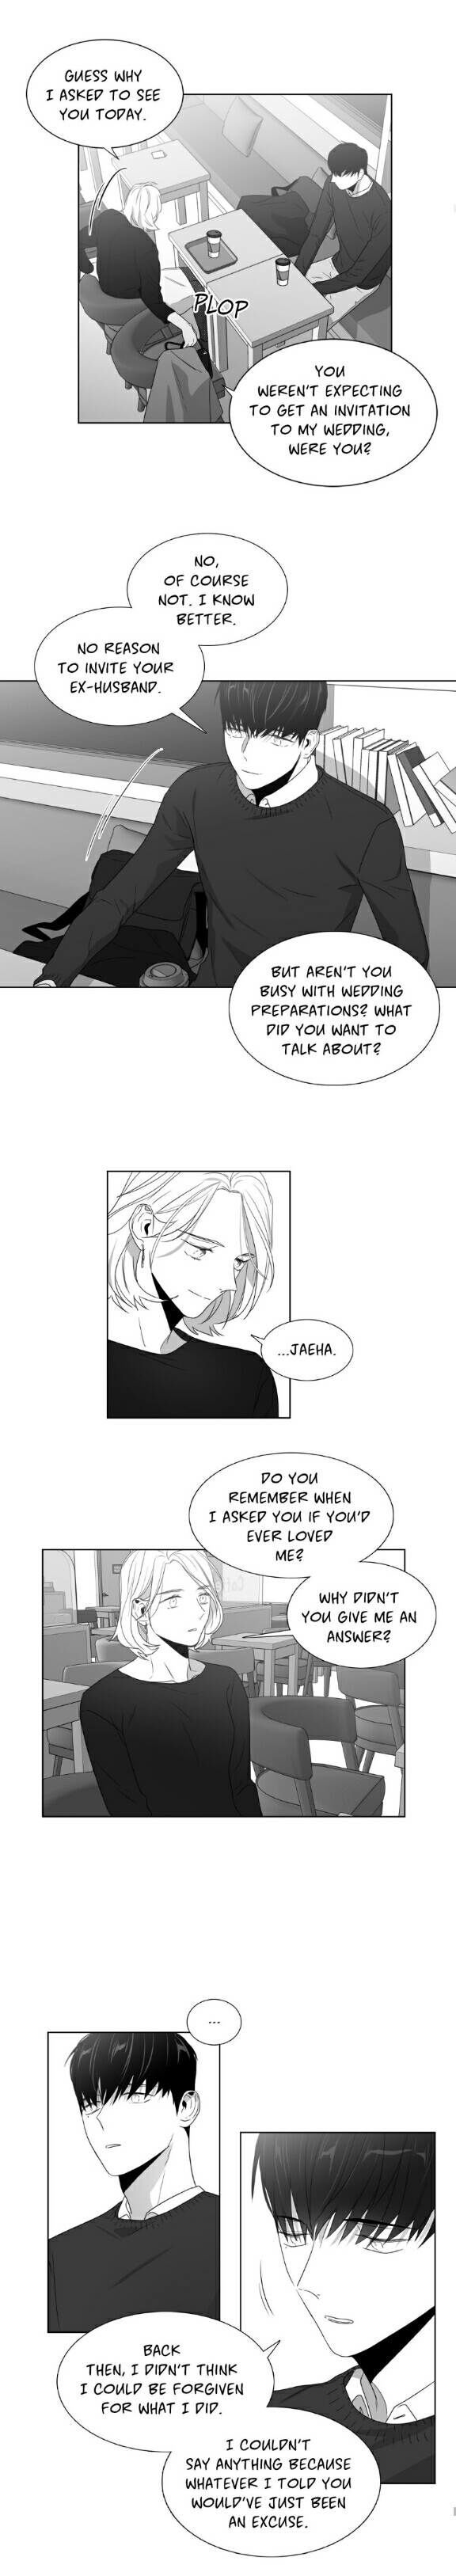 Lover Boy (Lezhin) Chapter 058 page 7